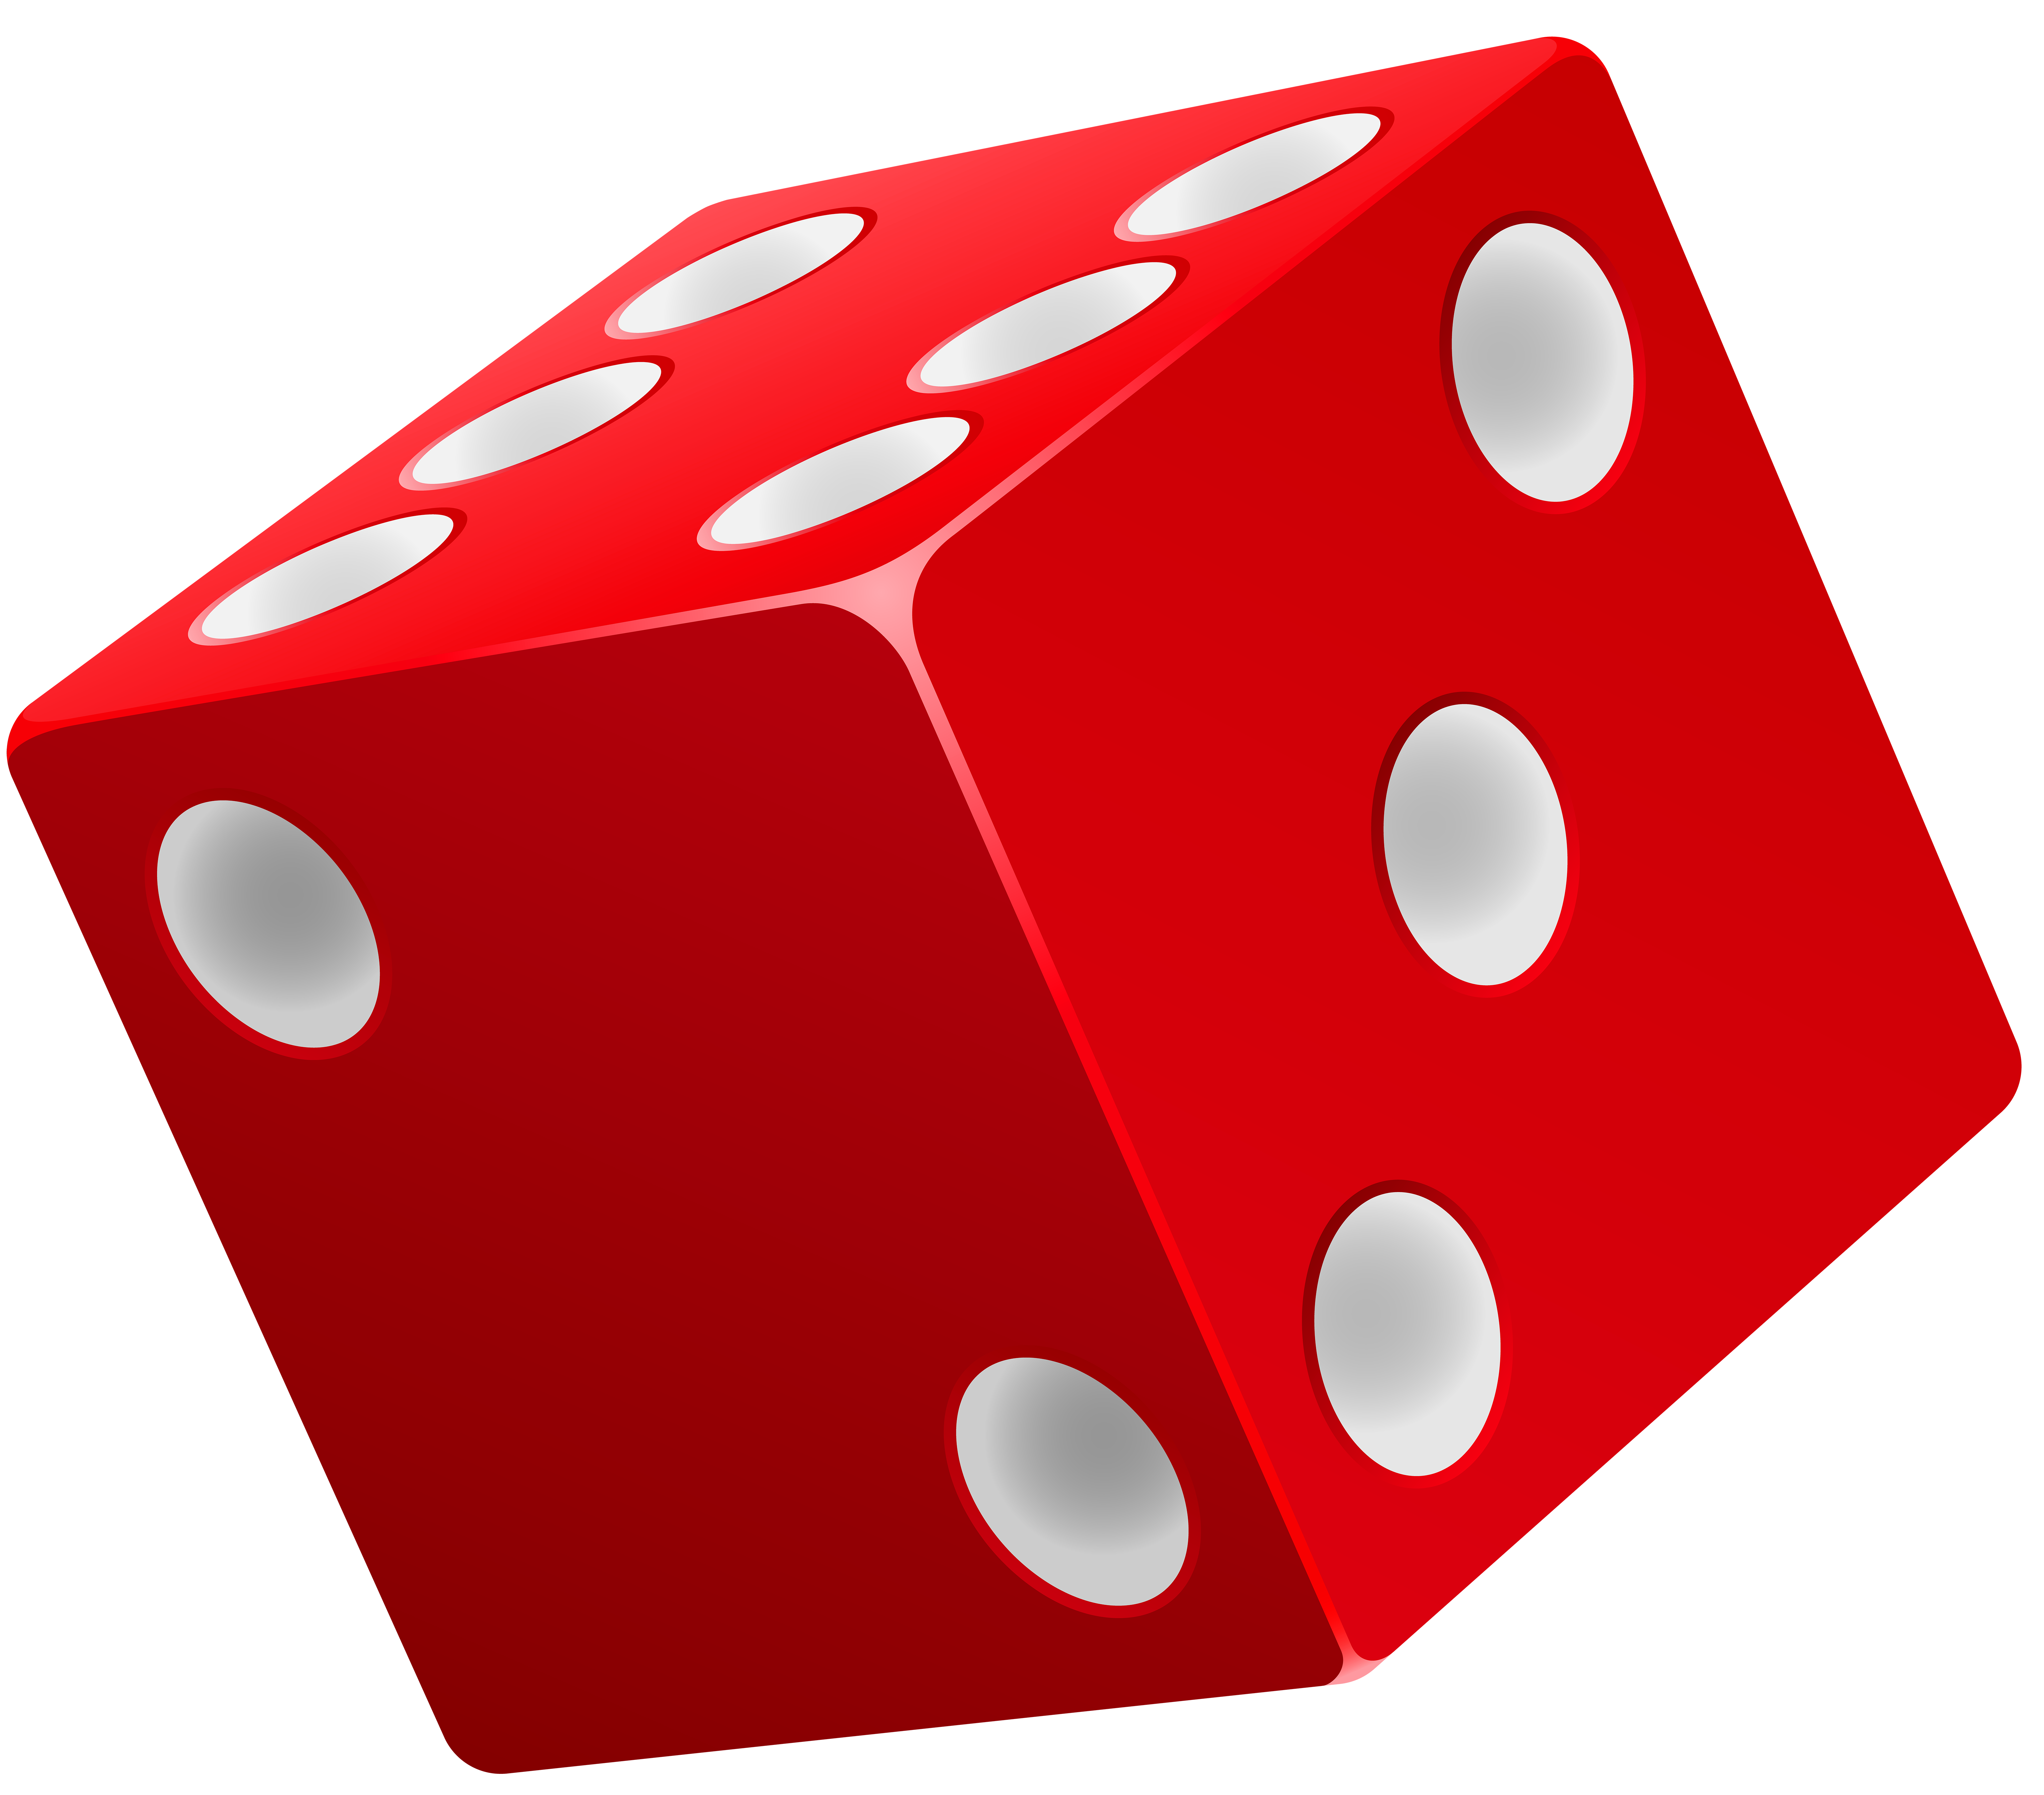 dice clipart cool